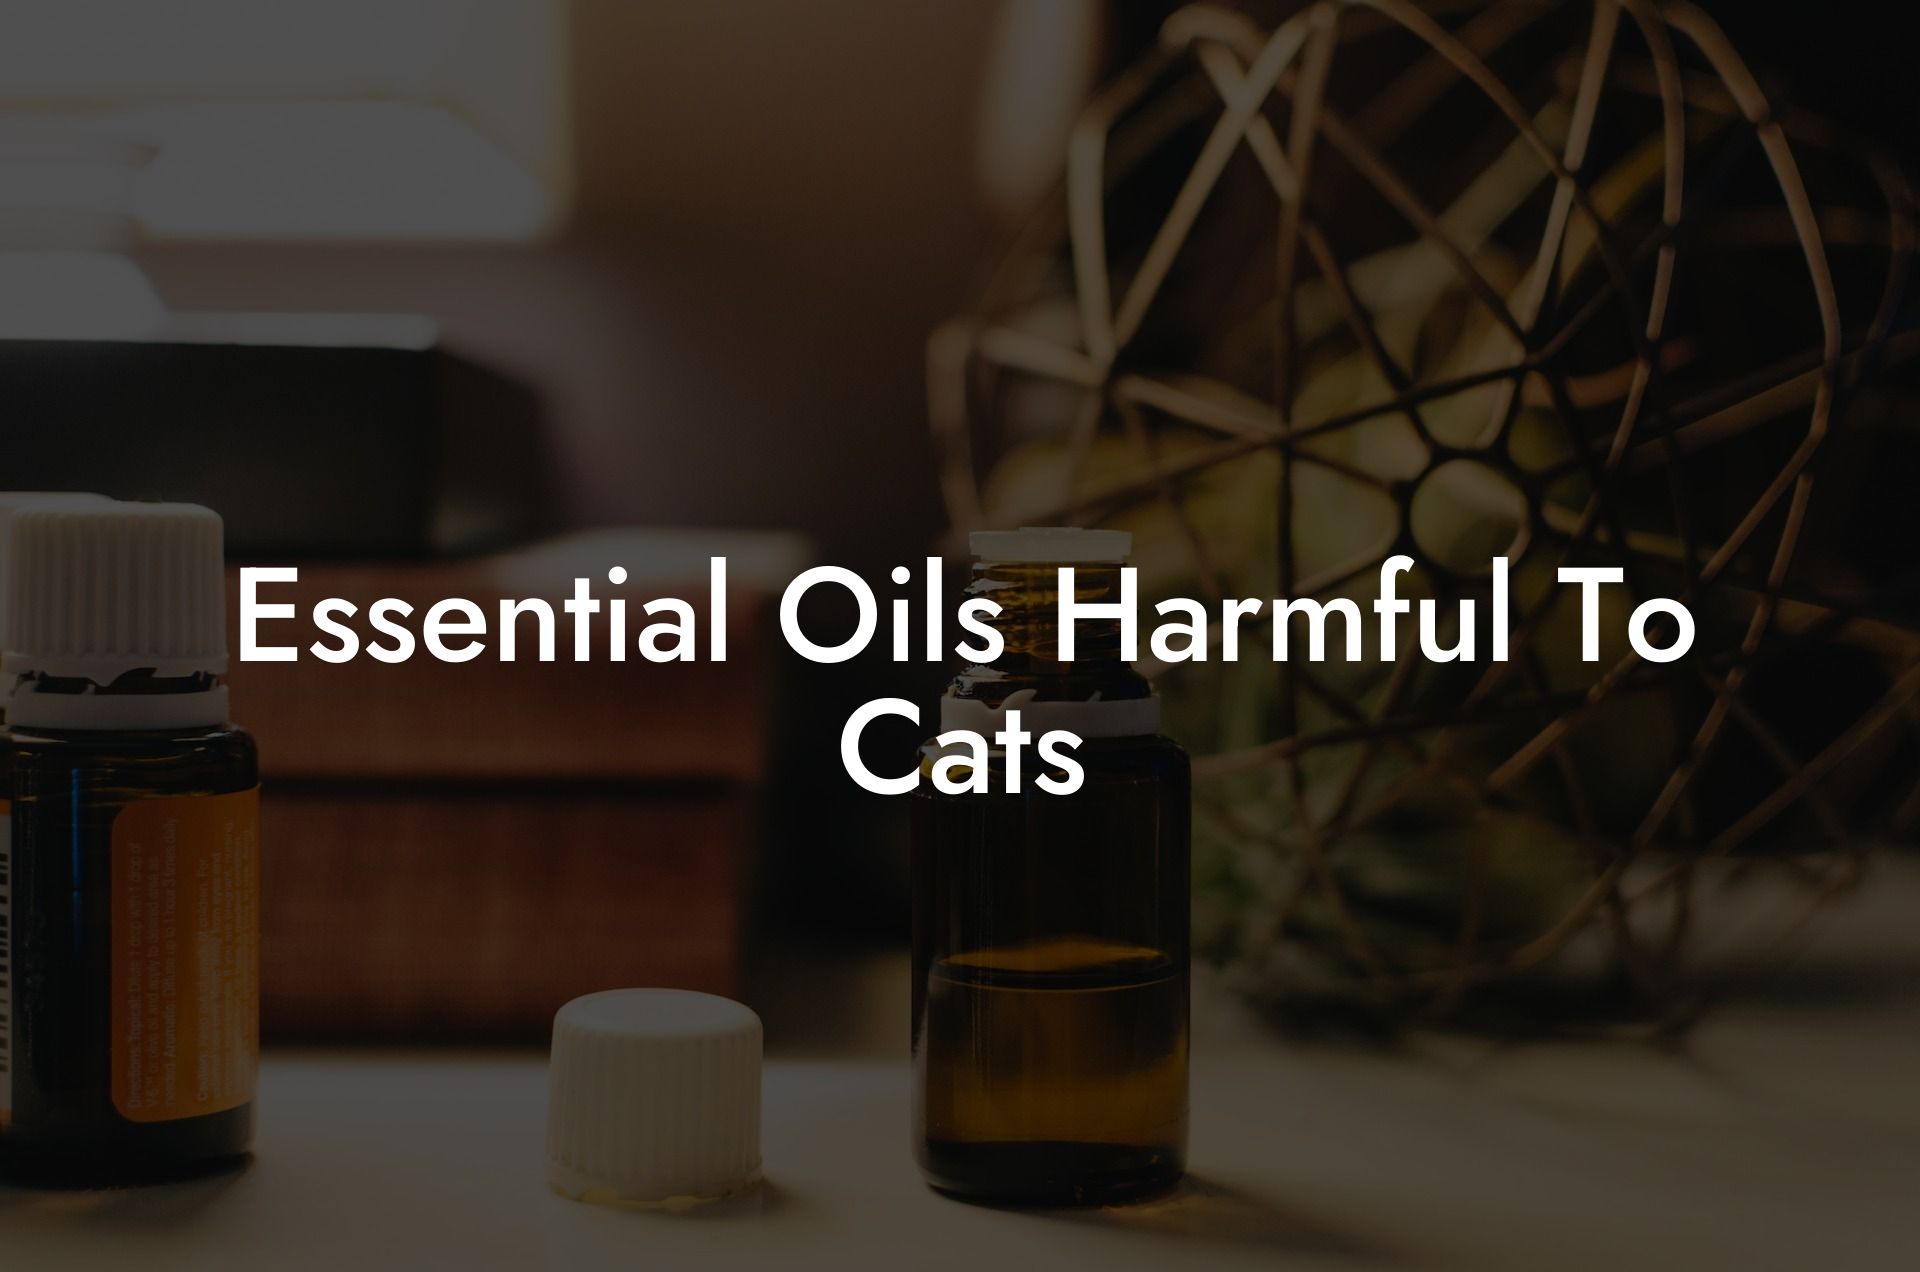 Essential Oils Harmful To Cats